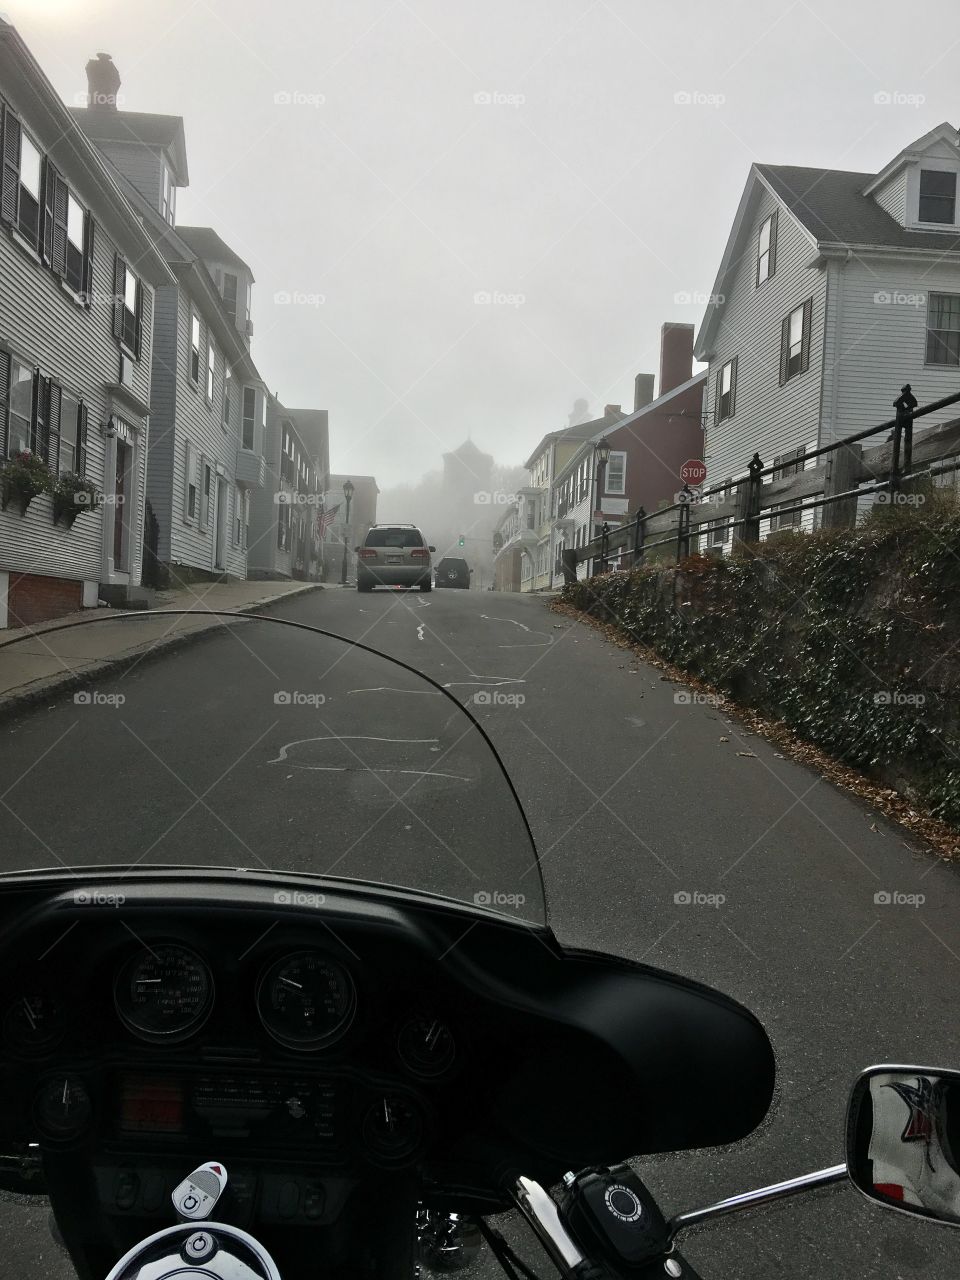 Typical housing in Plymouth, MA🇺🇸 area near the Center of Town. Look how close the houses are to each other & to the road! Photo taken from back of Harley on a ride. 🏍